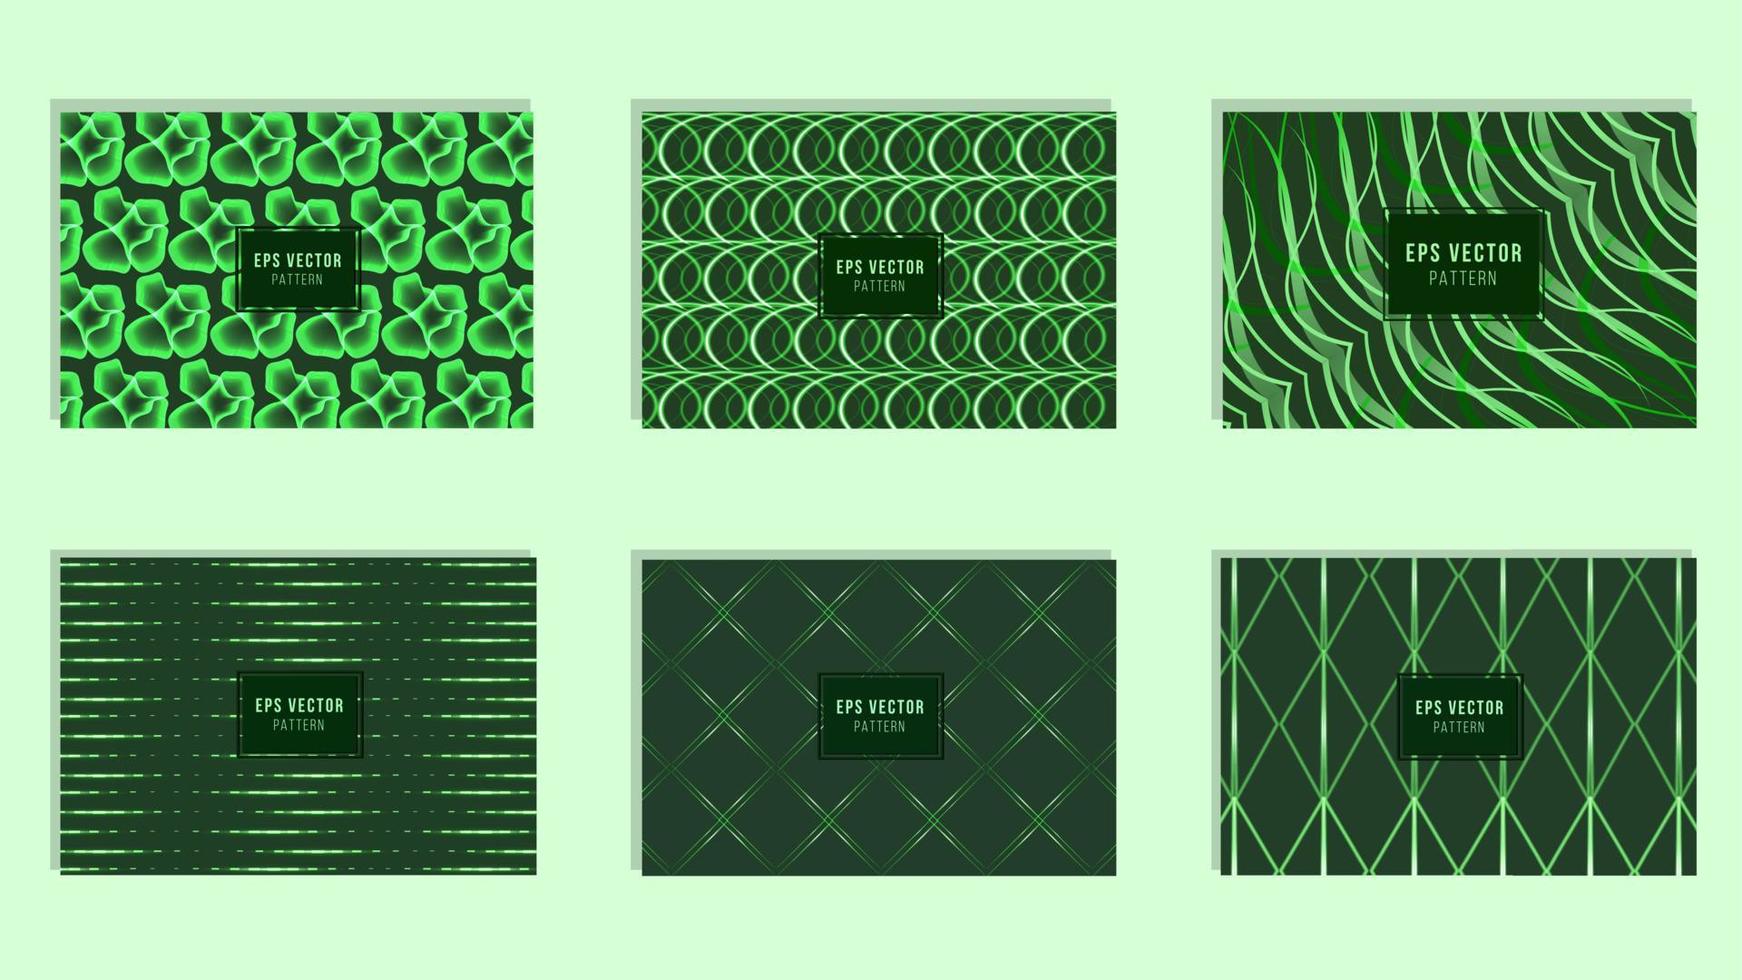 Green Design Presentation Template Seamless Pattern Background for Powerpoint, Brochure, Web, Company Profile, Brand, Banner vector